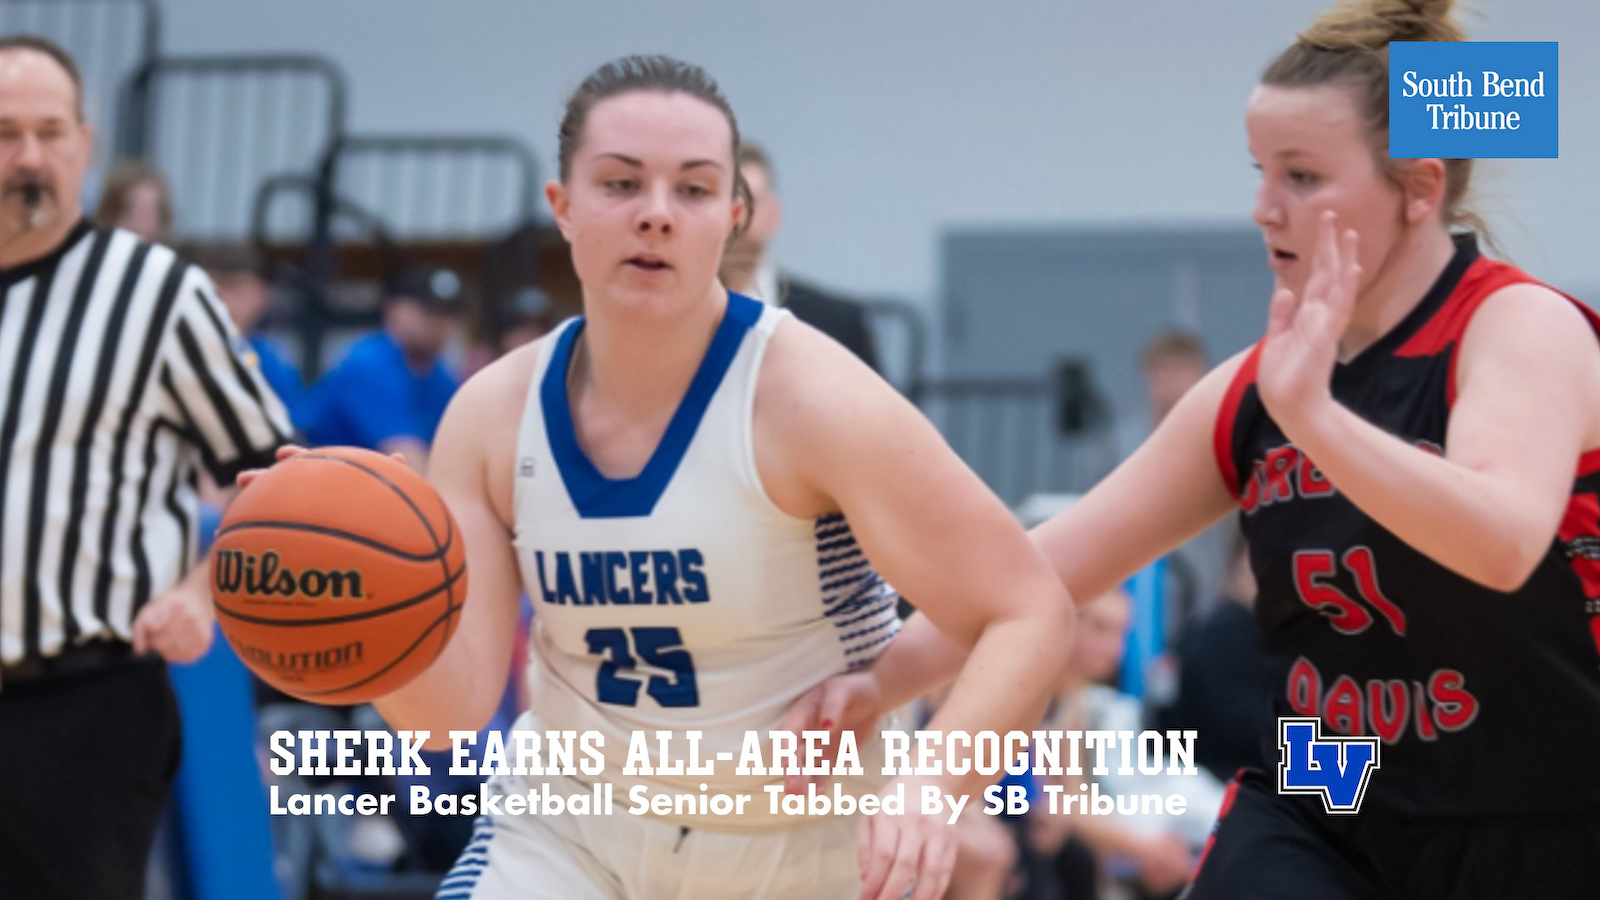 GBkb - Sherk Earns SBT Recognition GRAPHIC.png